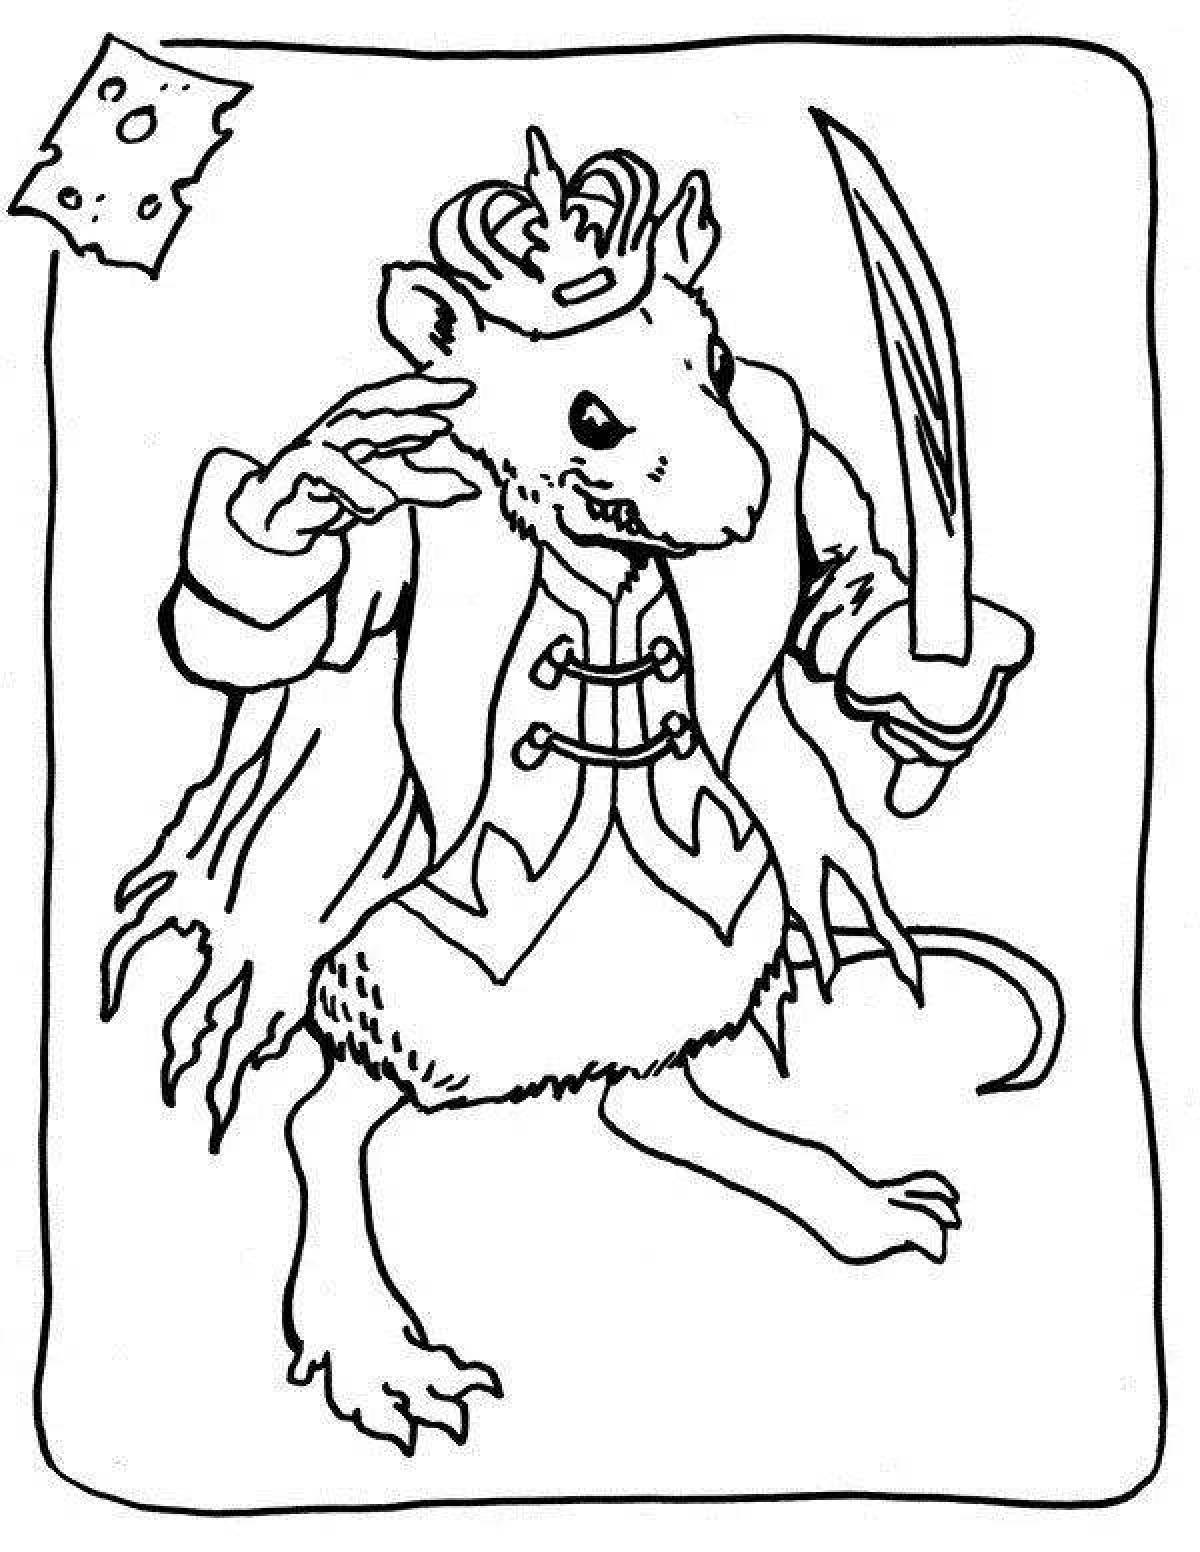 Great nutcracker and mouse king coloring book